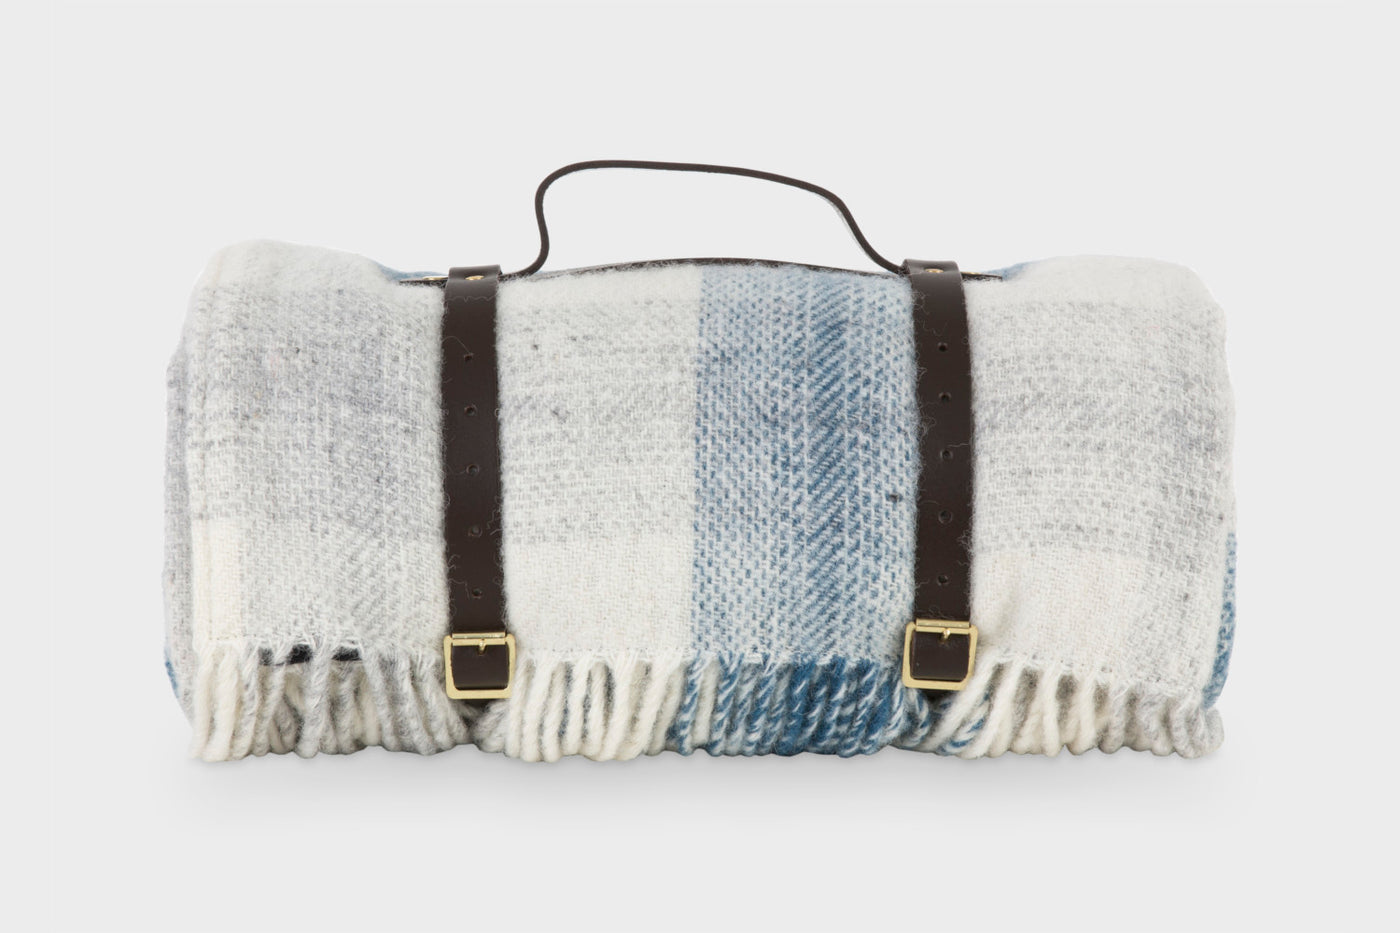 A blue and white wool picnic rug by The British Blanket Company. The picnic rug is rolled up with leather straps and a handle. 